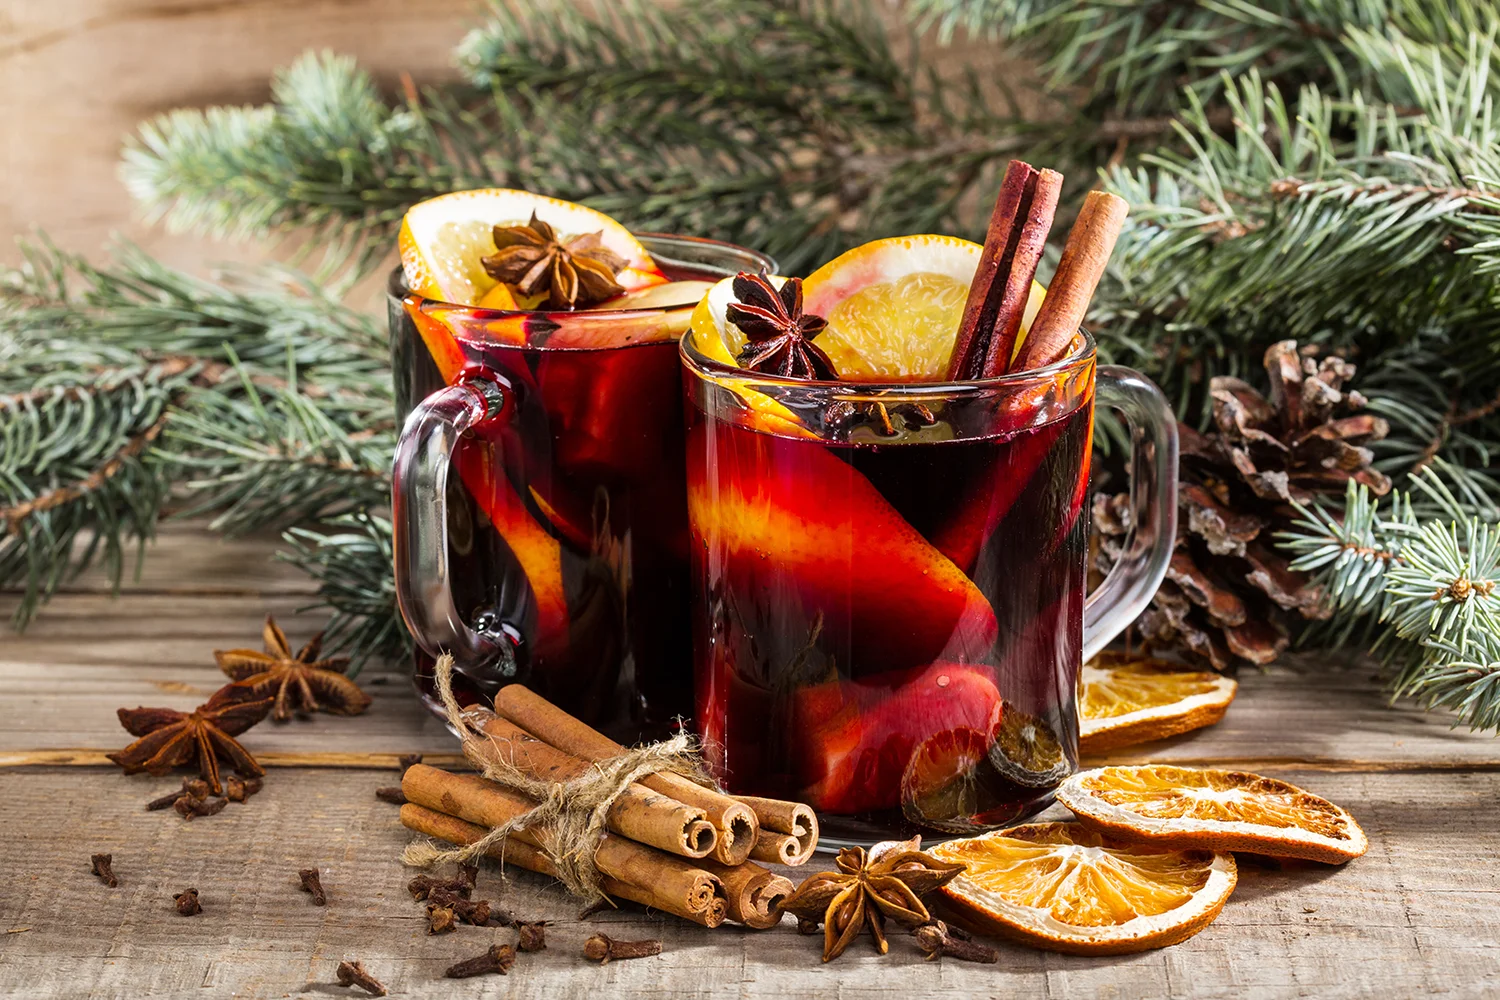 How To Make Gordon Ramsay’s Mulled Wine At Home Rate this Restaurant Wanna ...